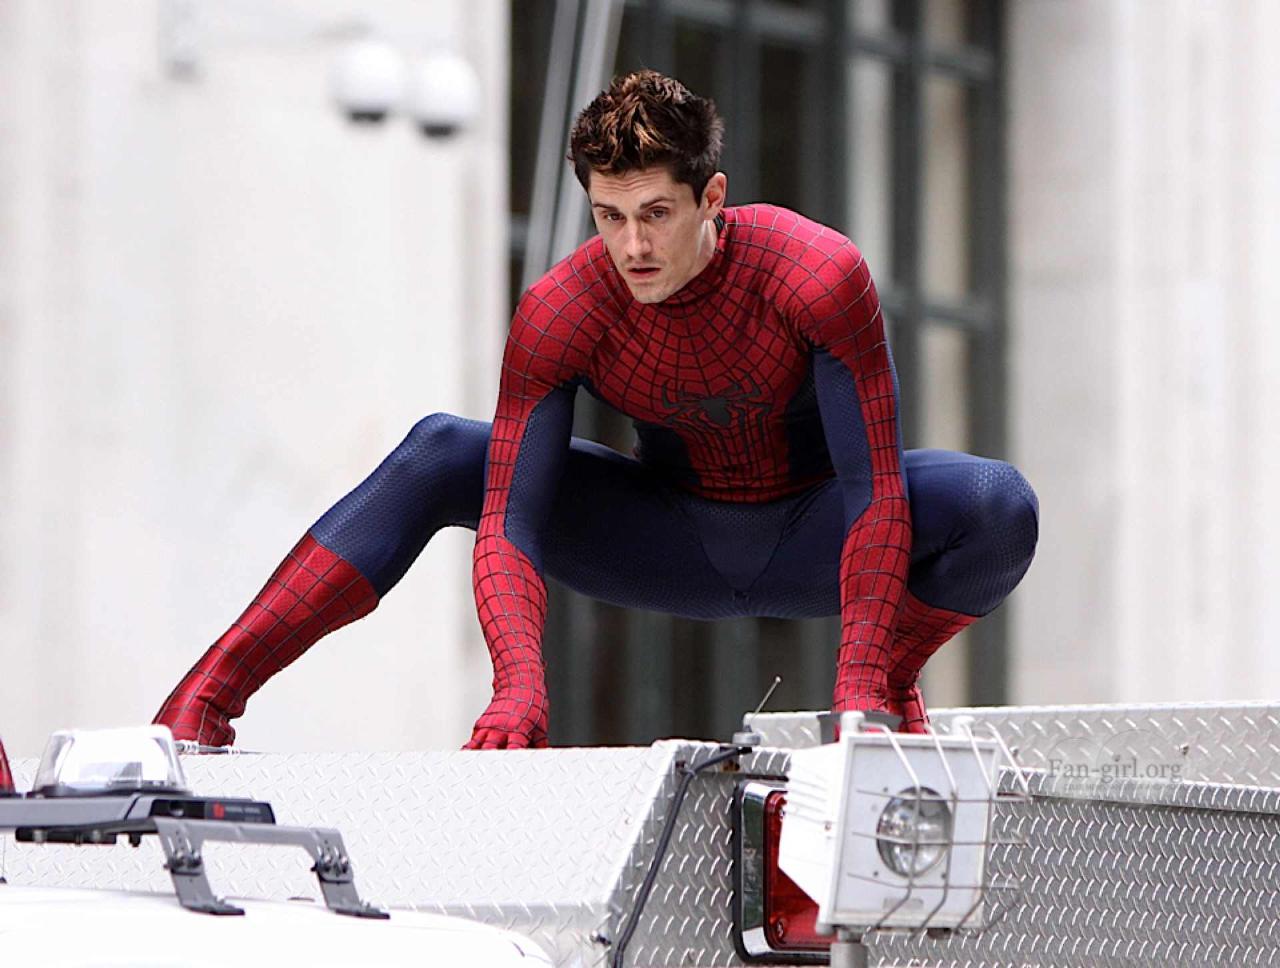 Amazing Spideman 2 in theaters May